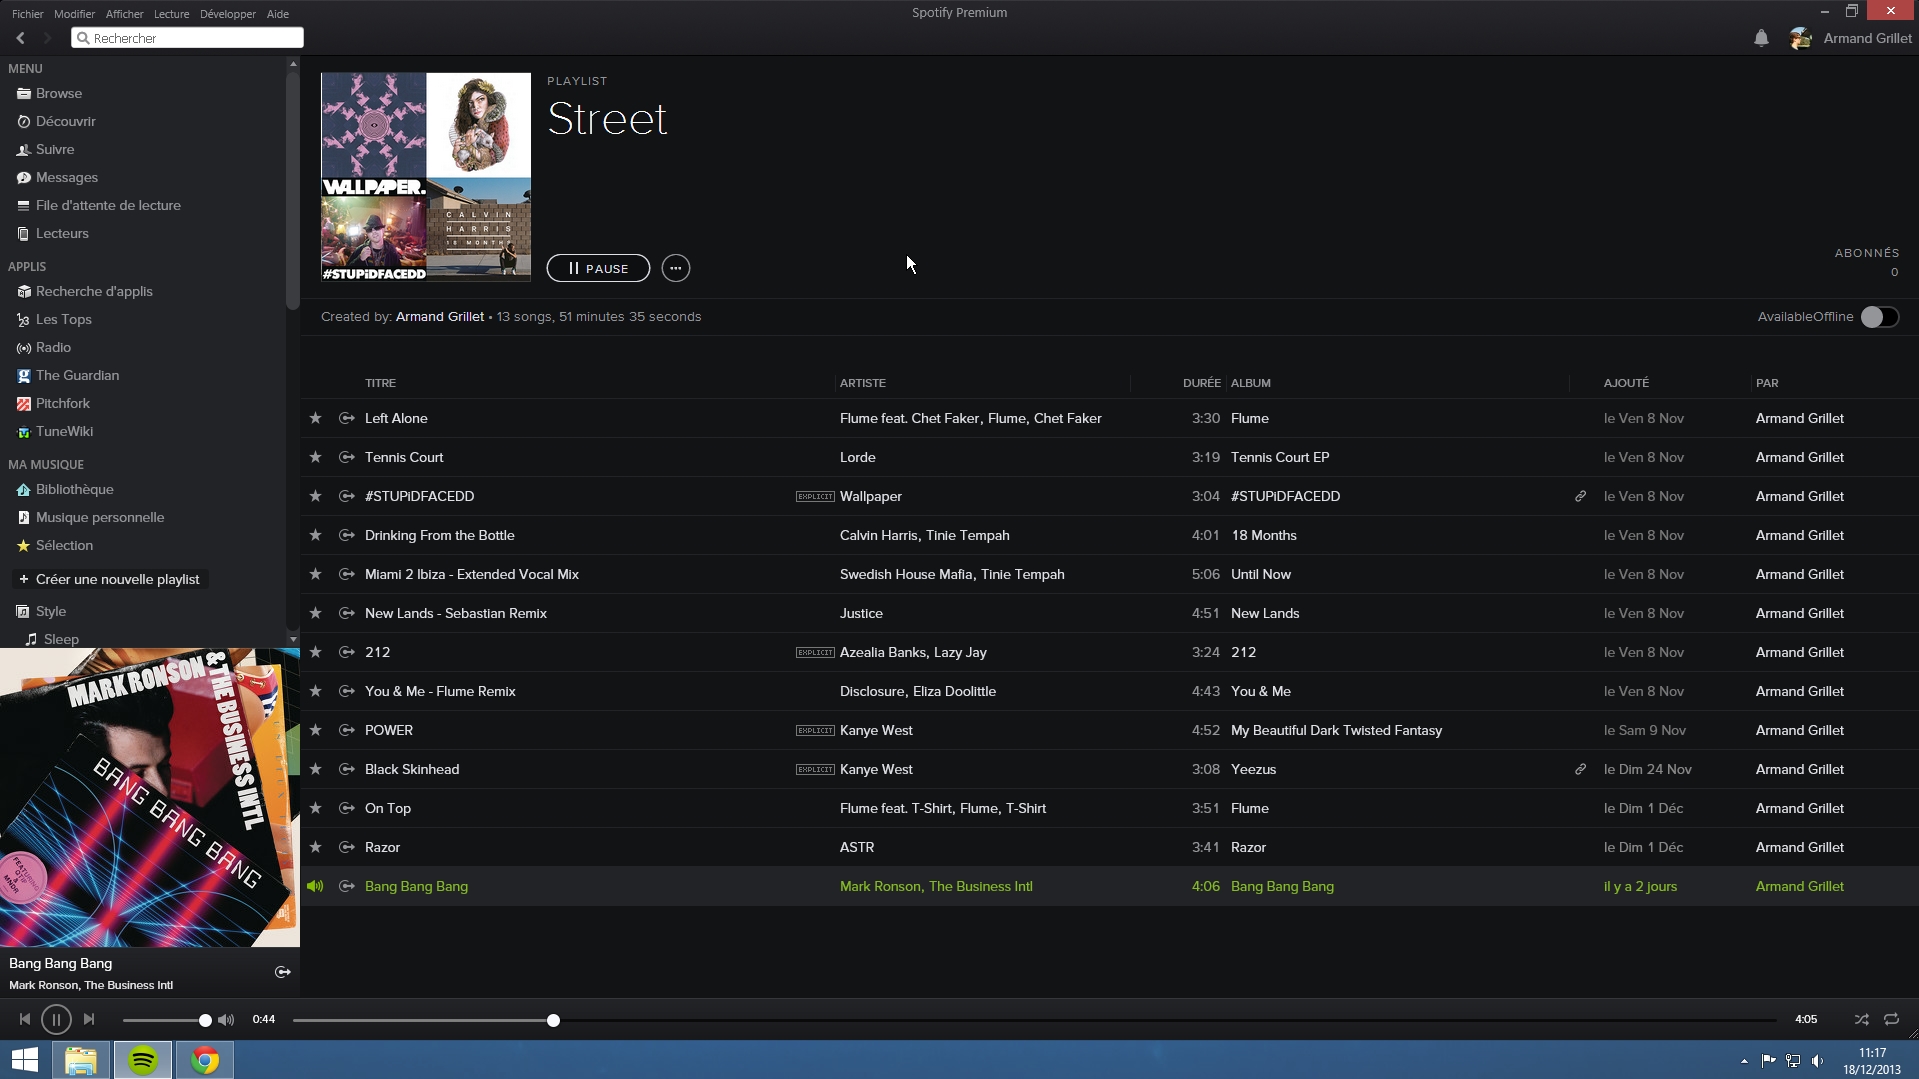 download the last version for mac Spotify 1.2.16.947